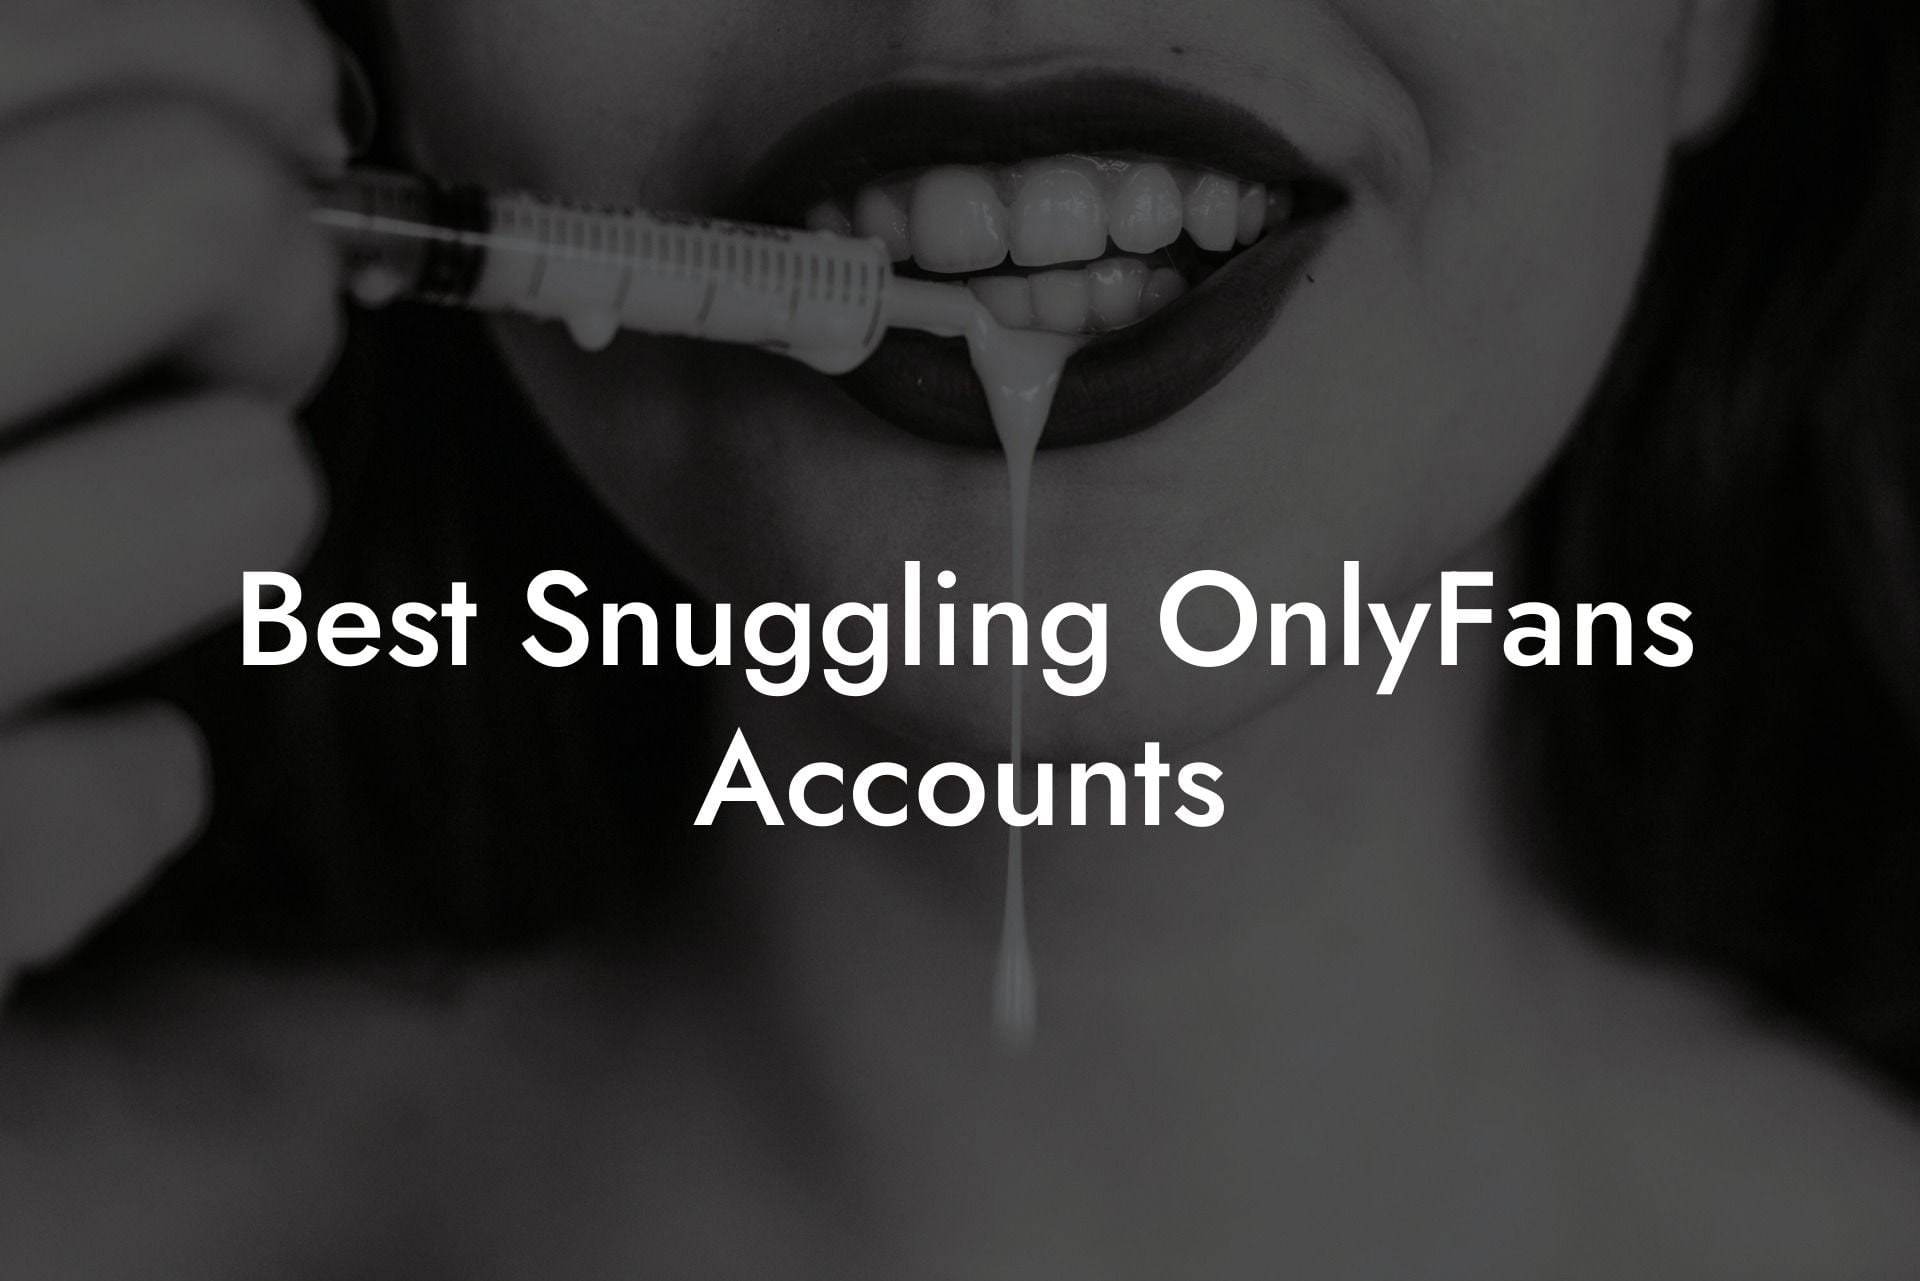 Best Snuggling OnlyFans Accounts